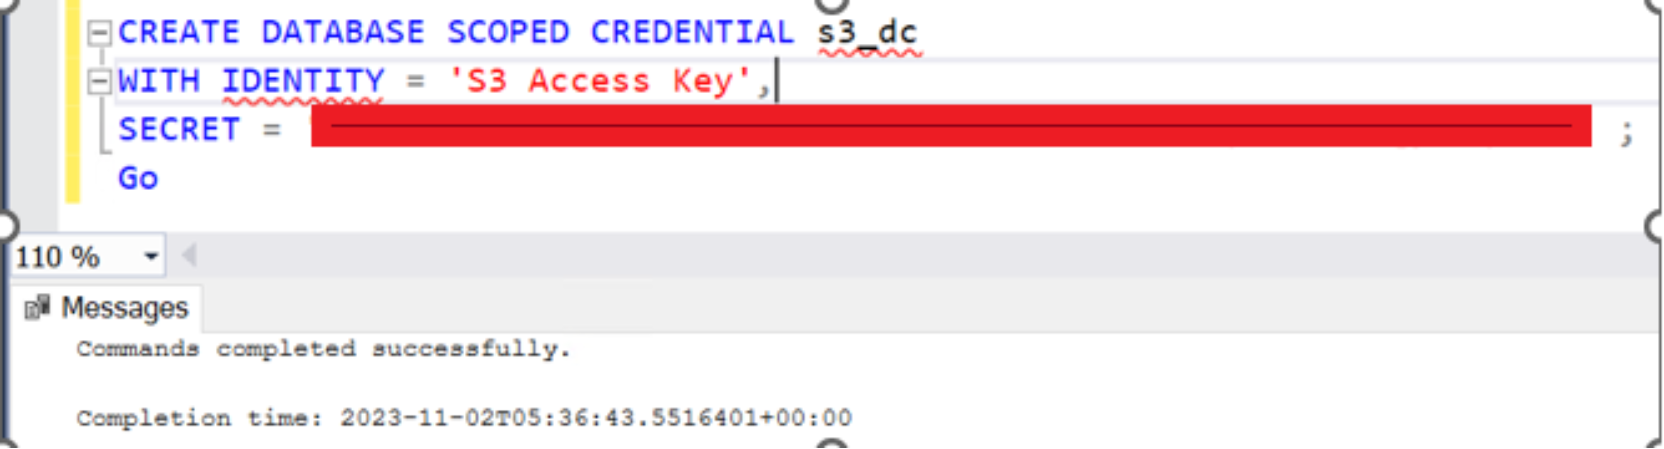 This shows an example of how to create a database scoped credential.